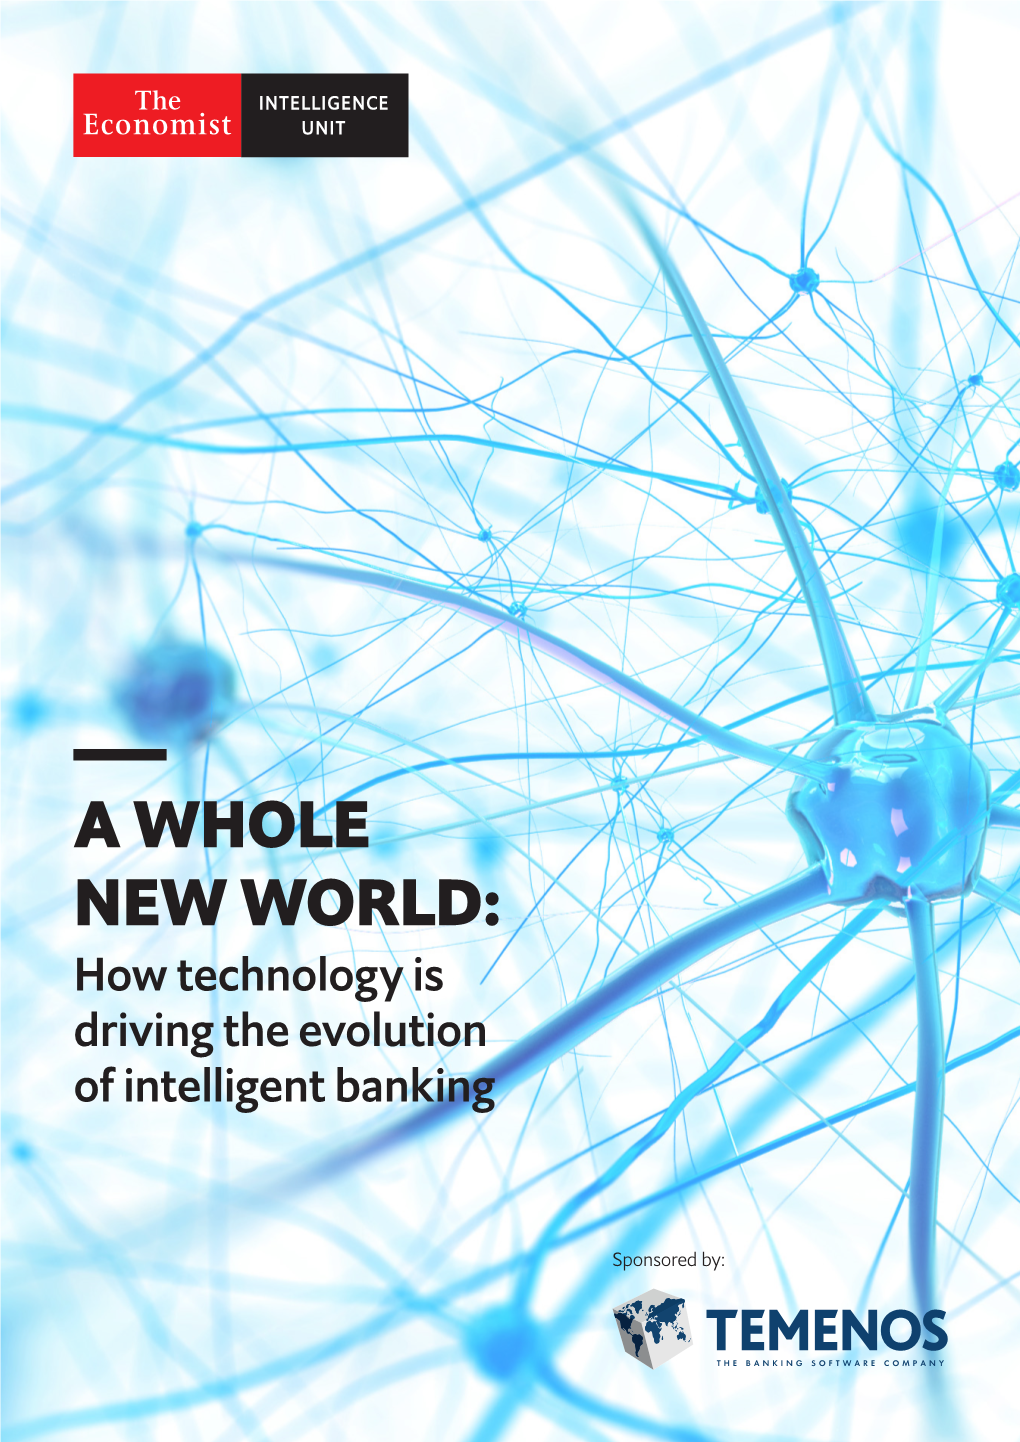 A WHOLE NEW WORLD: How Technology Is Driving the Evolution of Intelligent Banking